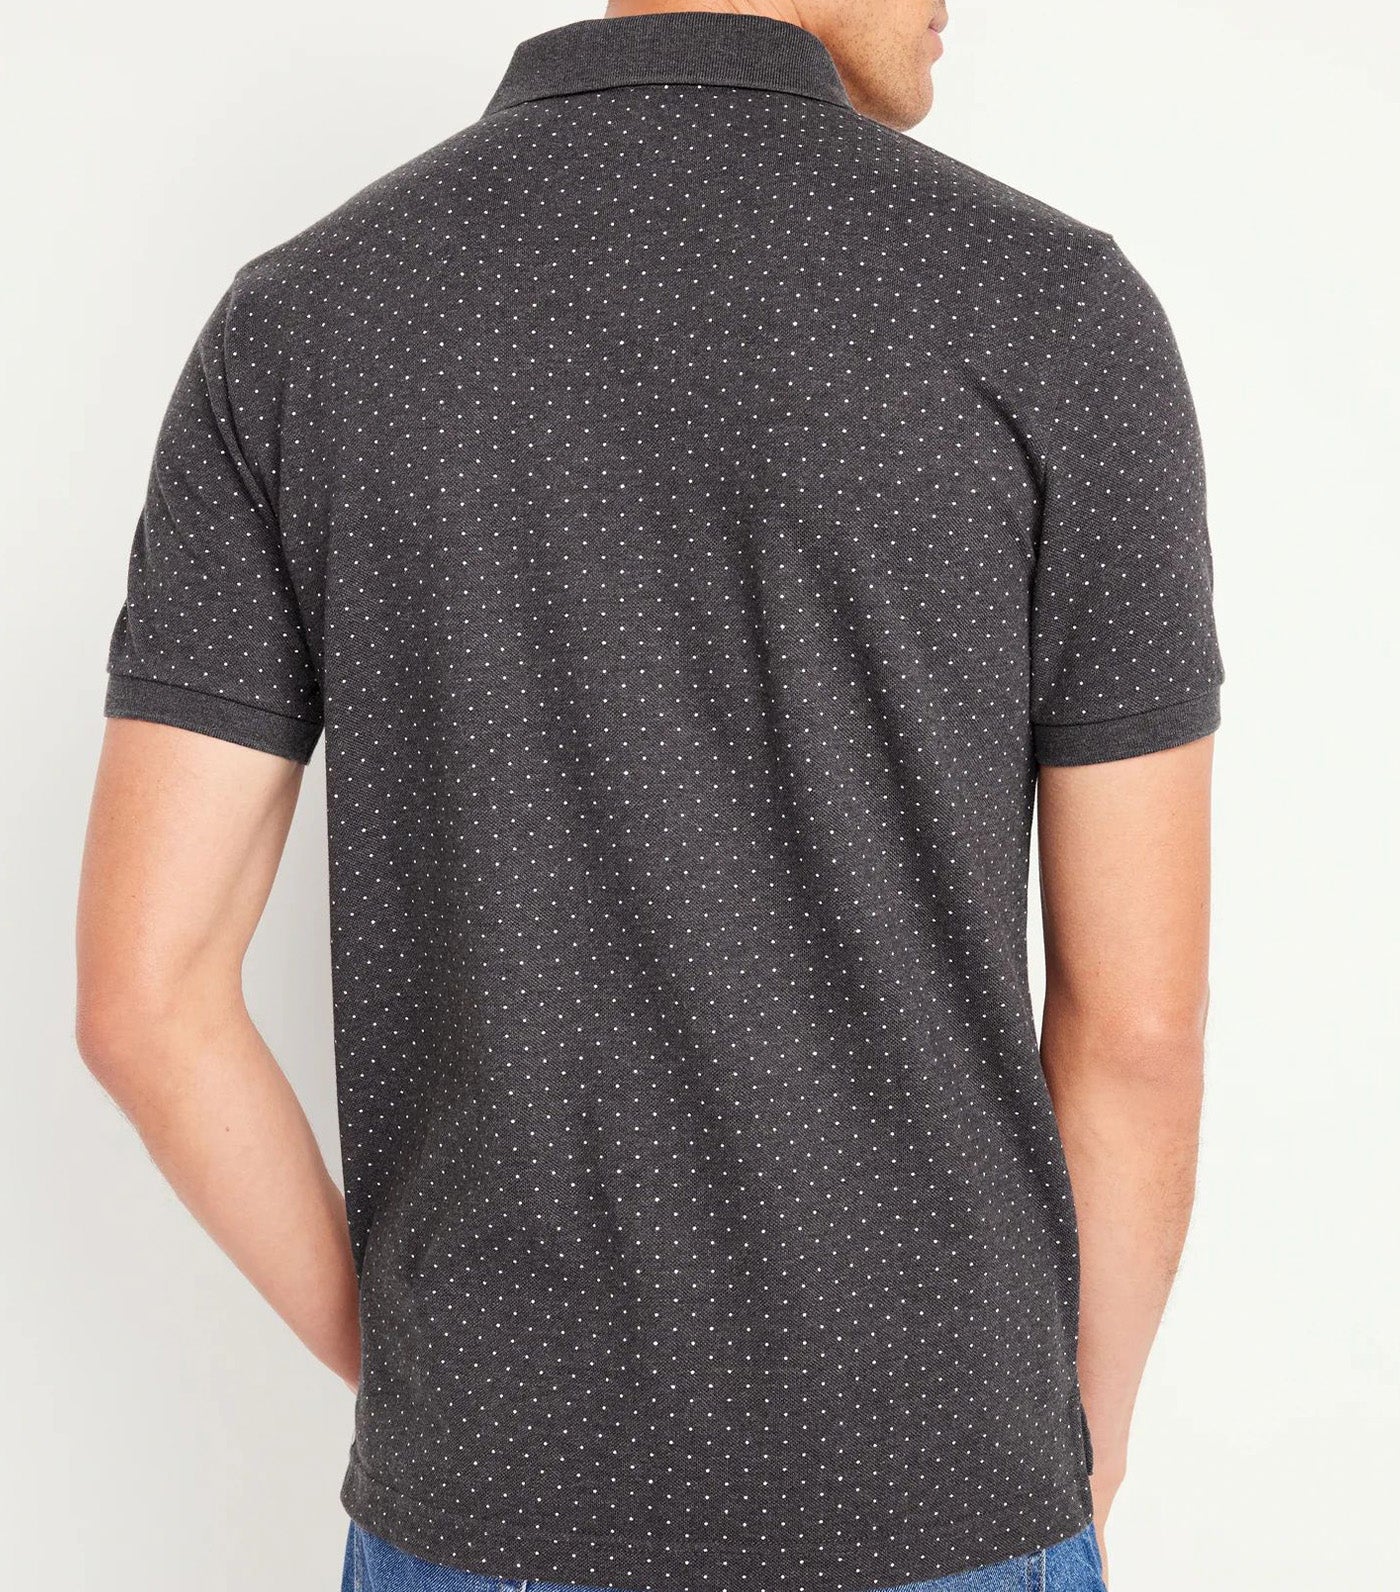 Classic Fit Pique Polo For Men On Black Dot